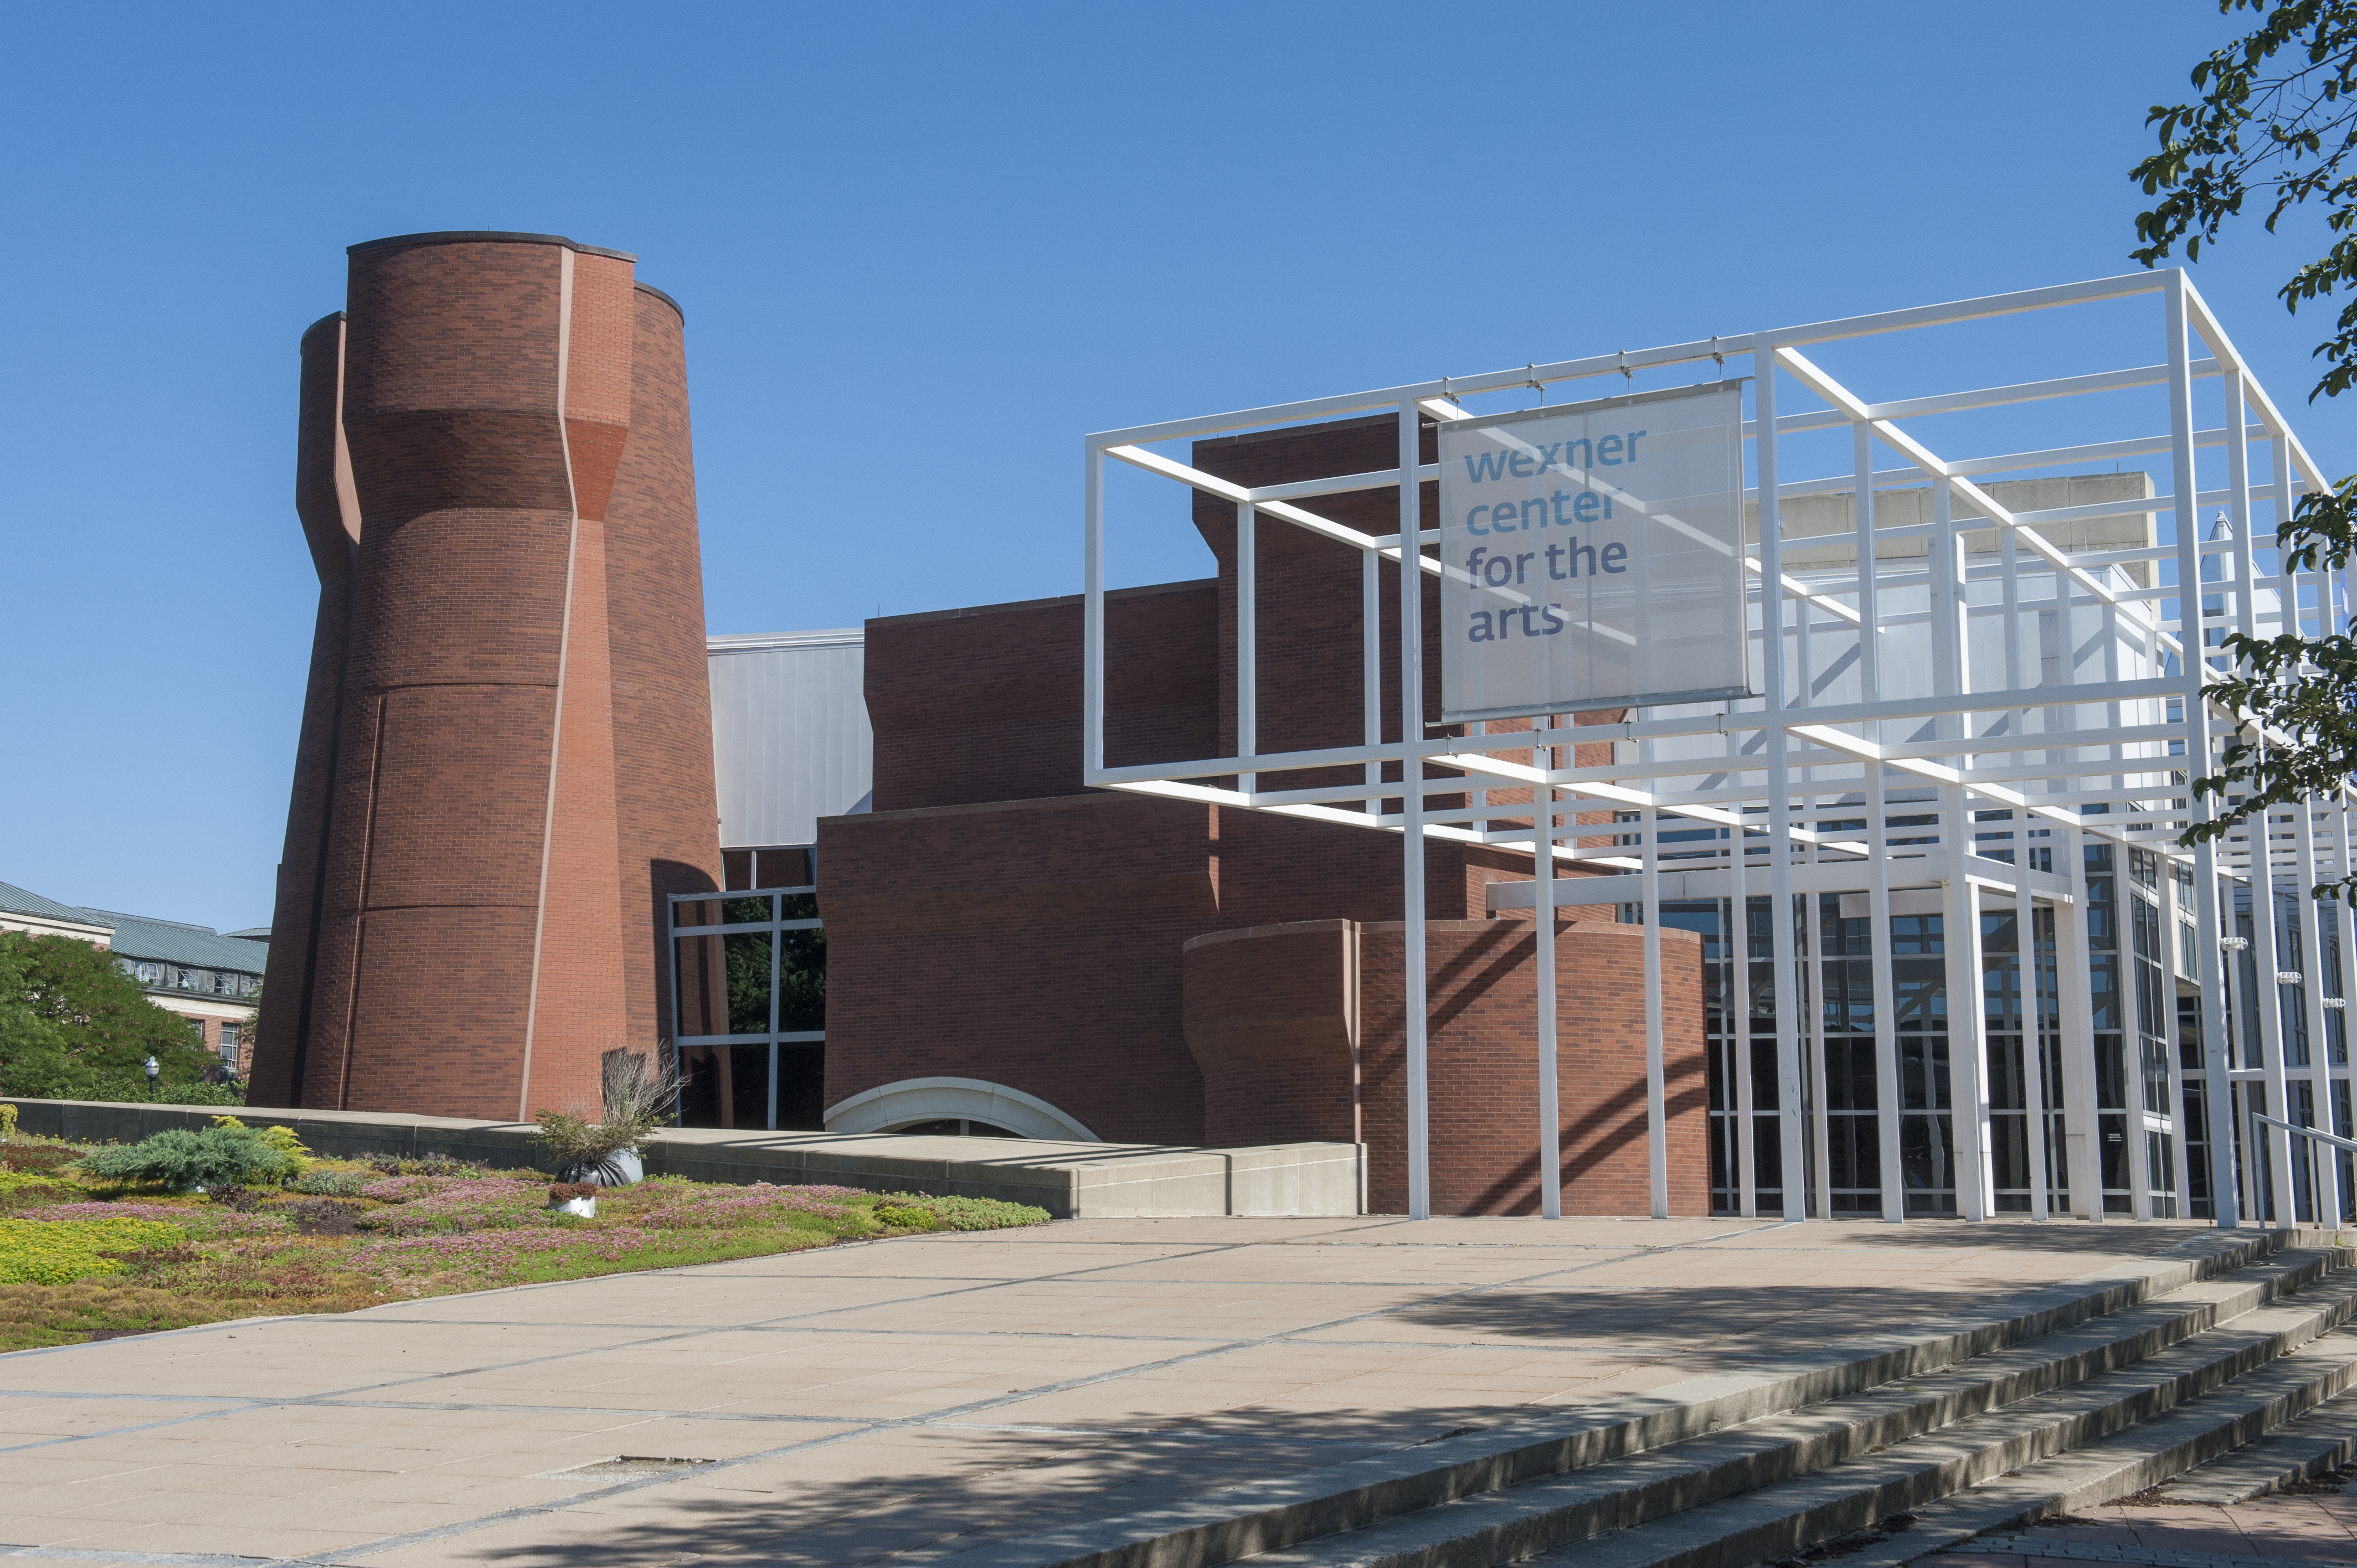 Wexner Center for the Arts external view